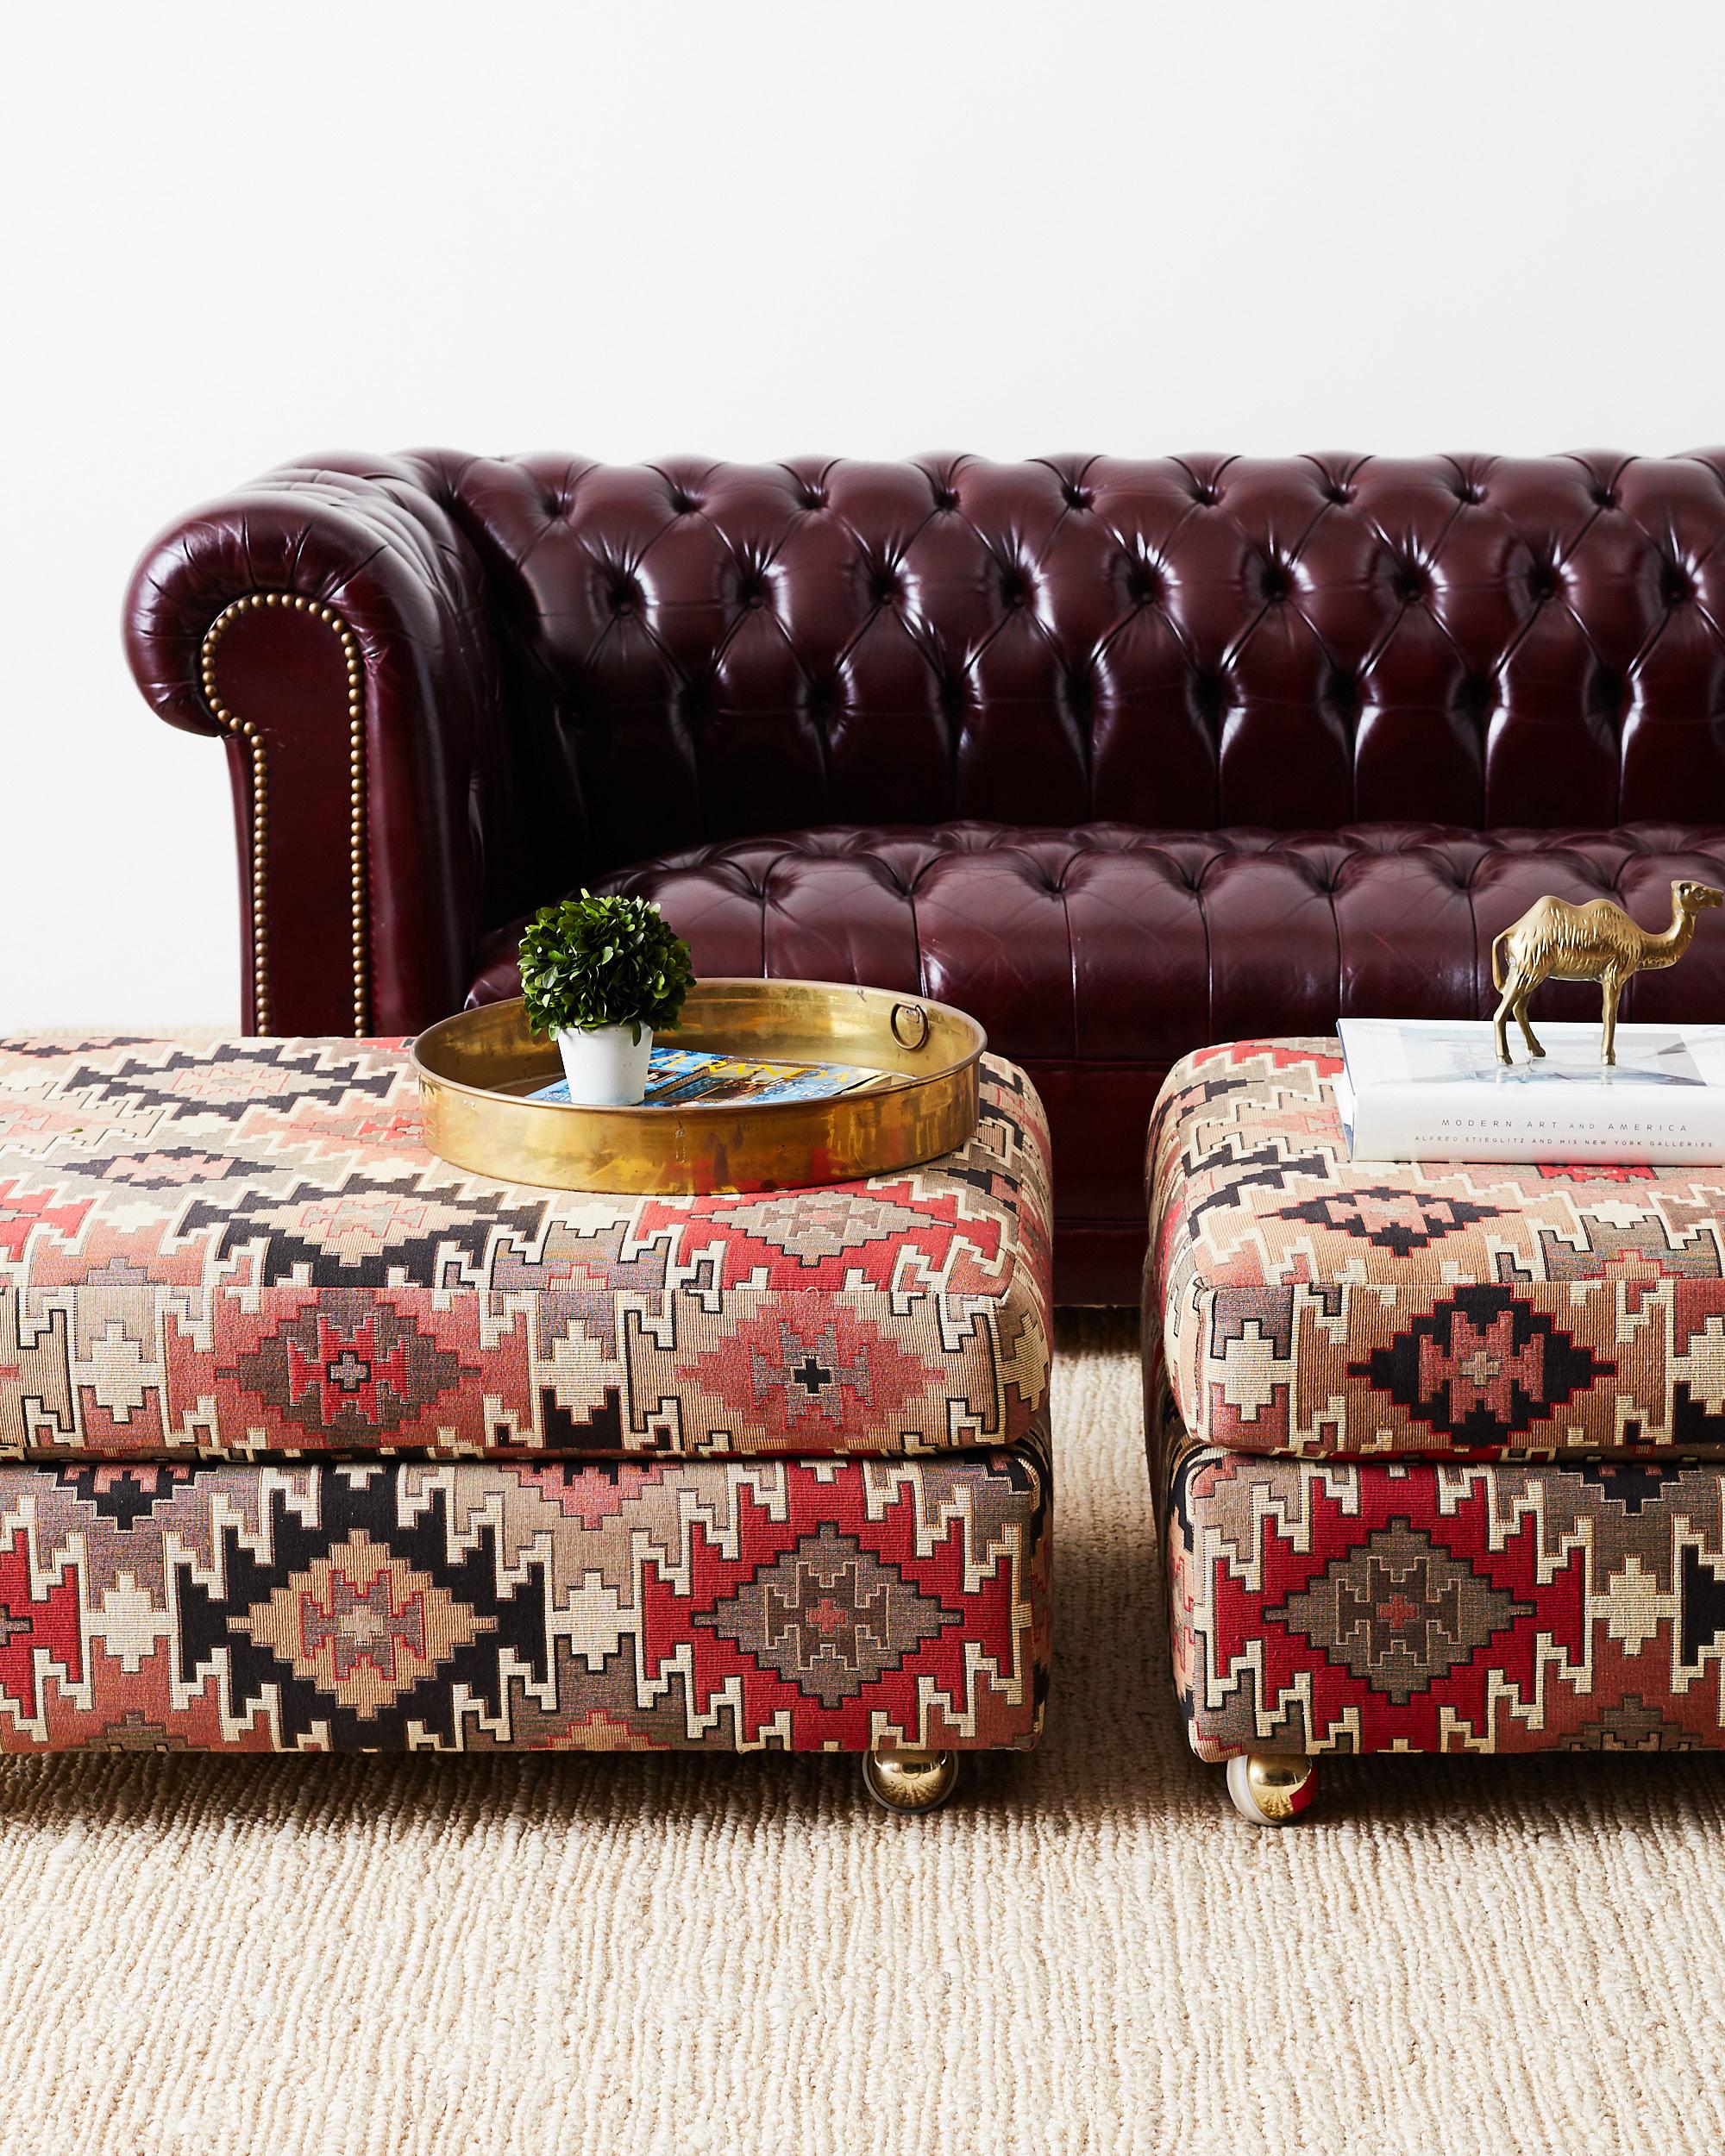 Dazzling pair of upholstered ottomans featuring a Turkish Kilim tribal style fabric. The busy symmetry of the design is reminiscent of a Native American Navajo weave. Beautiful array of red, grey, khaki, salmon and black colors. Fitted over a